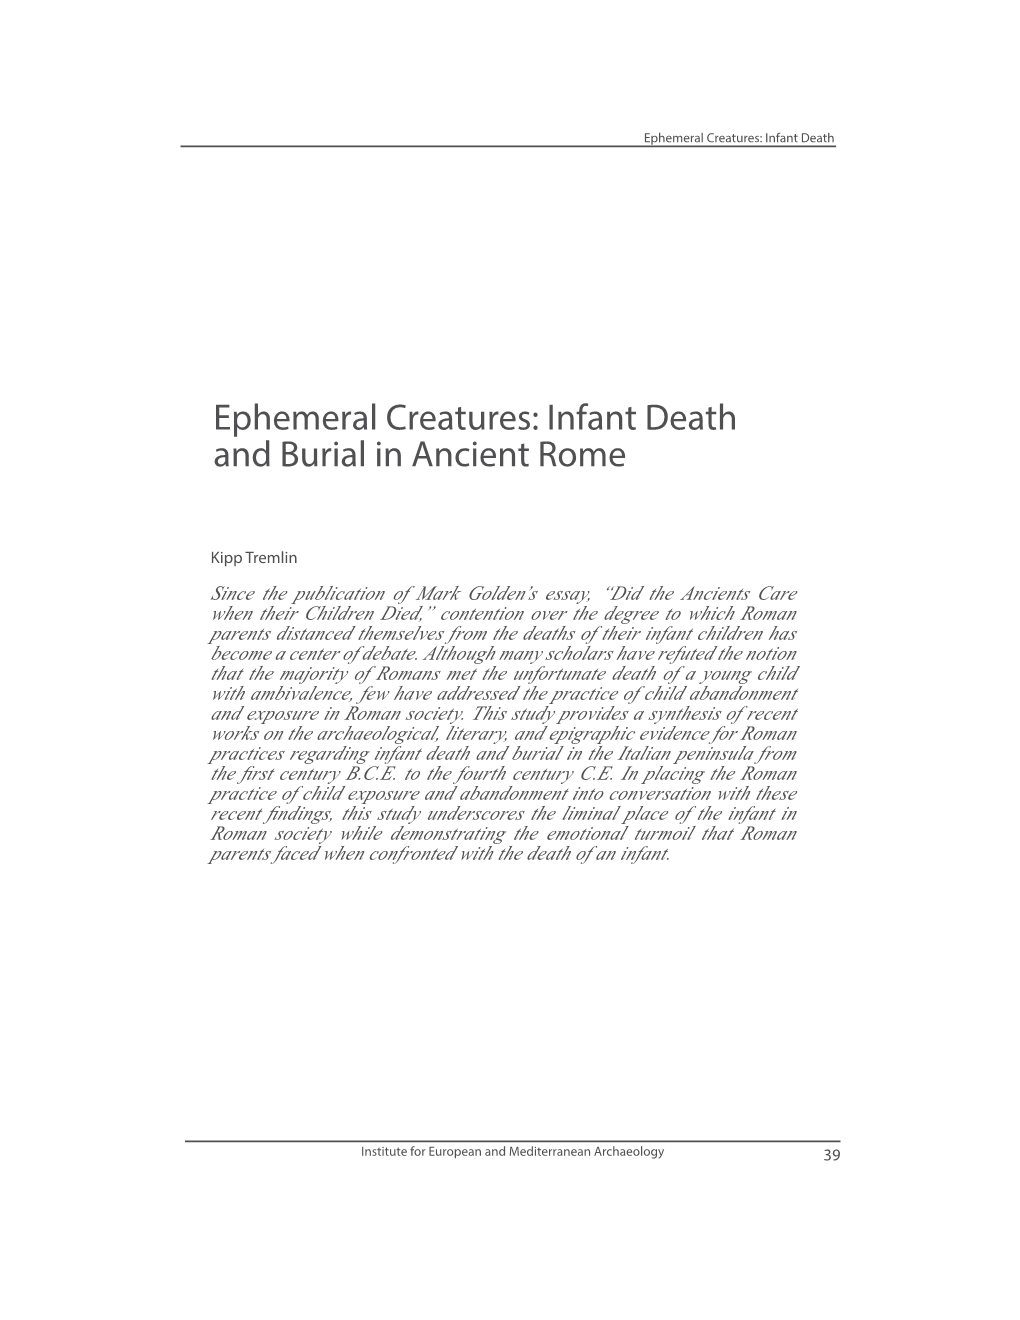 Infant Death and Burial in Ancient Rome